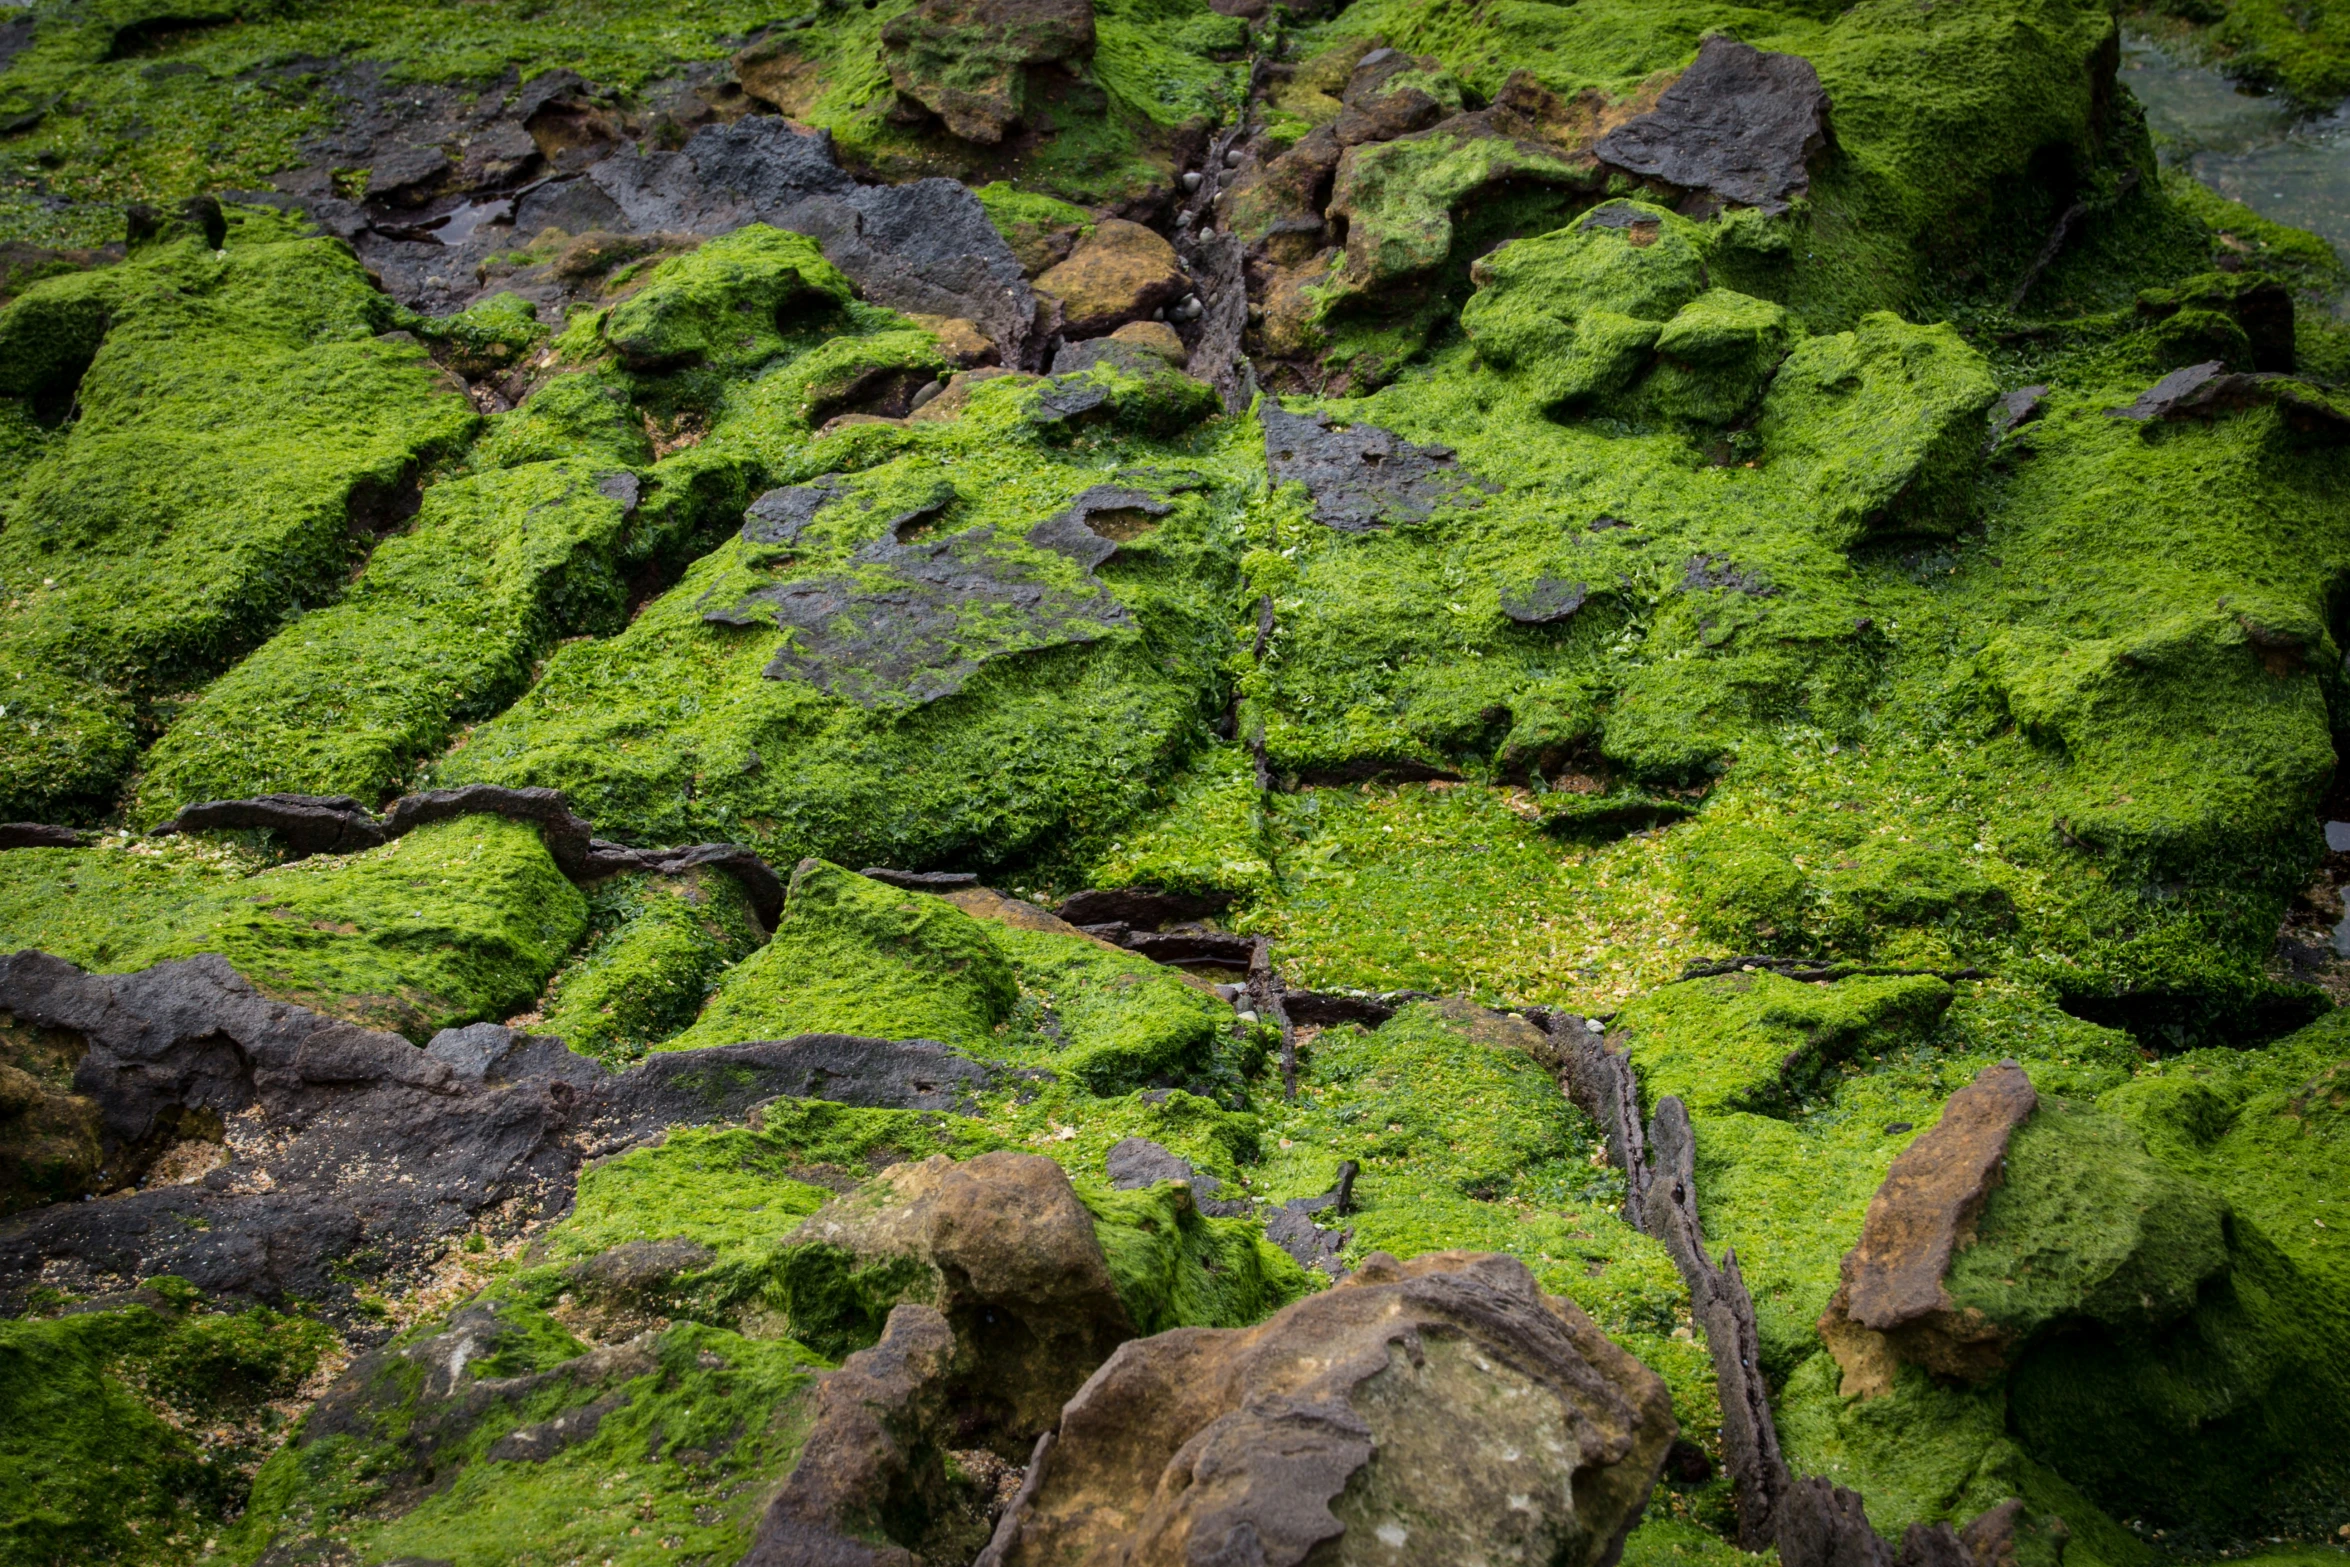 there is a lot of green mossy rocks